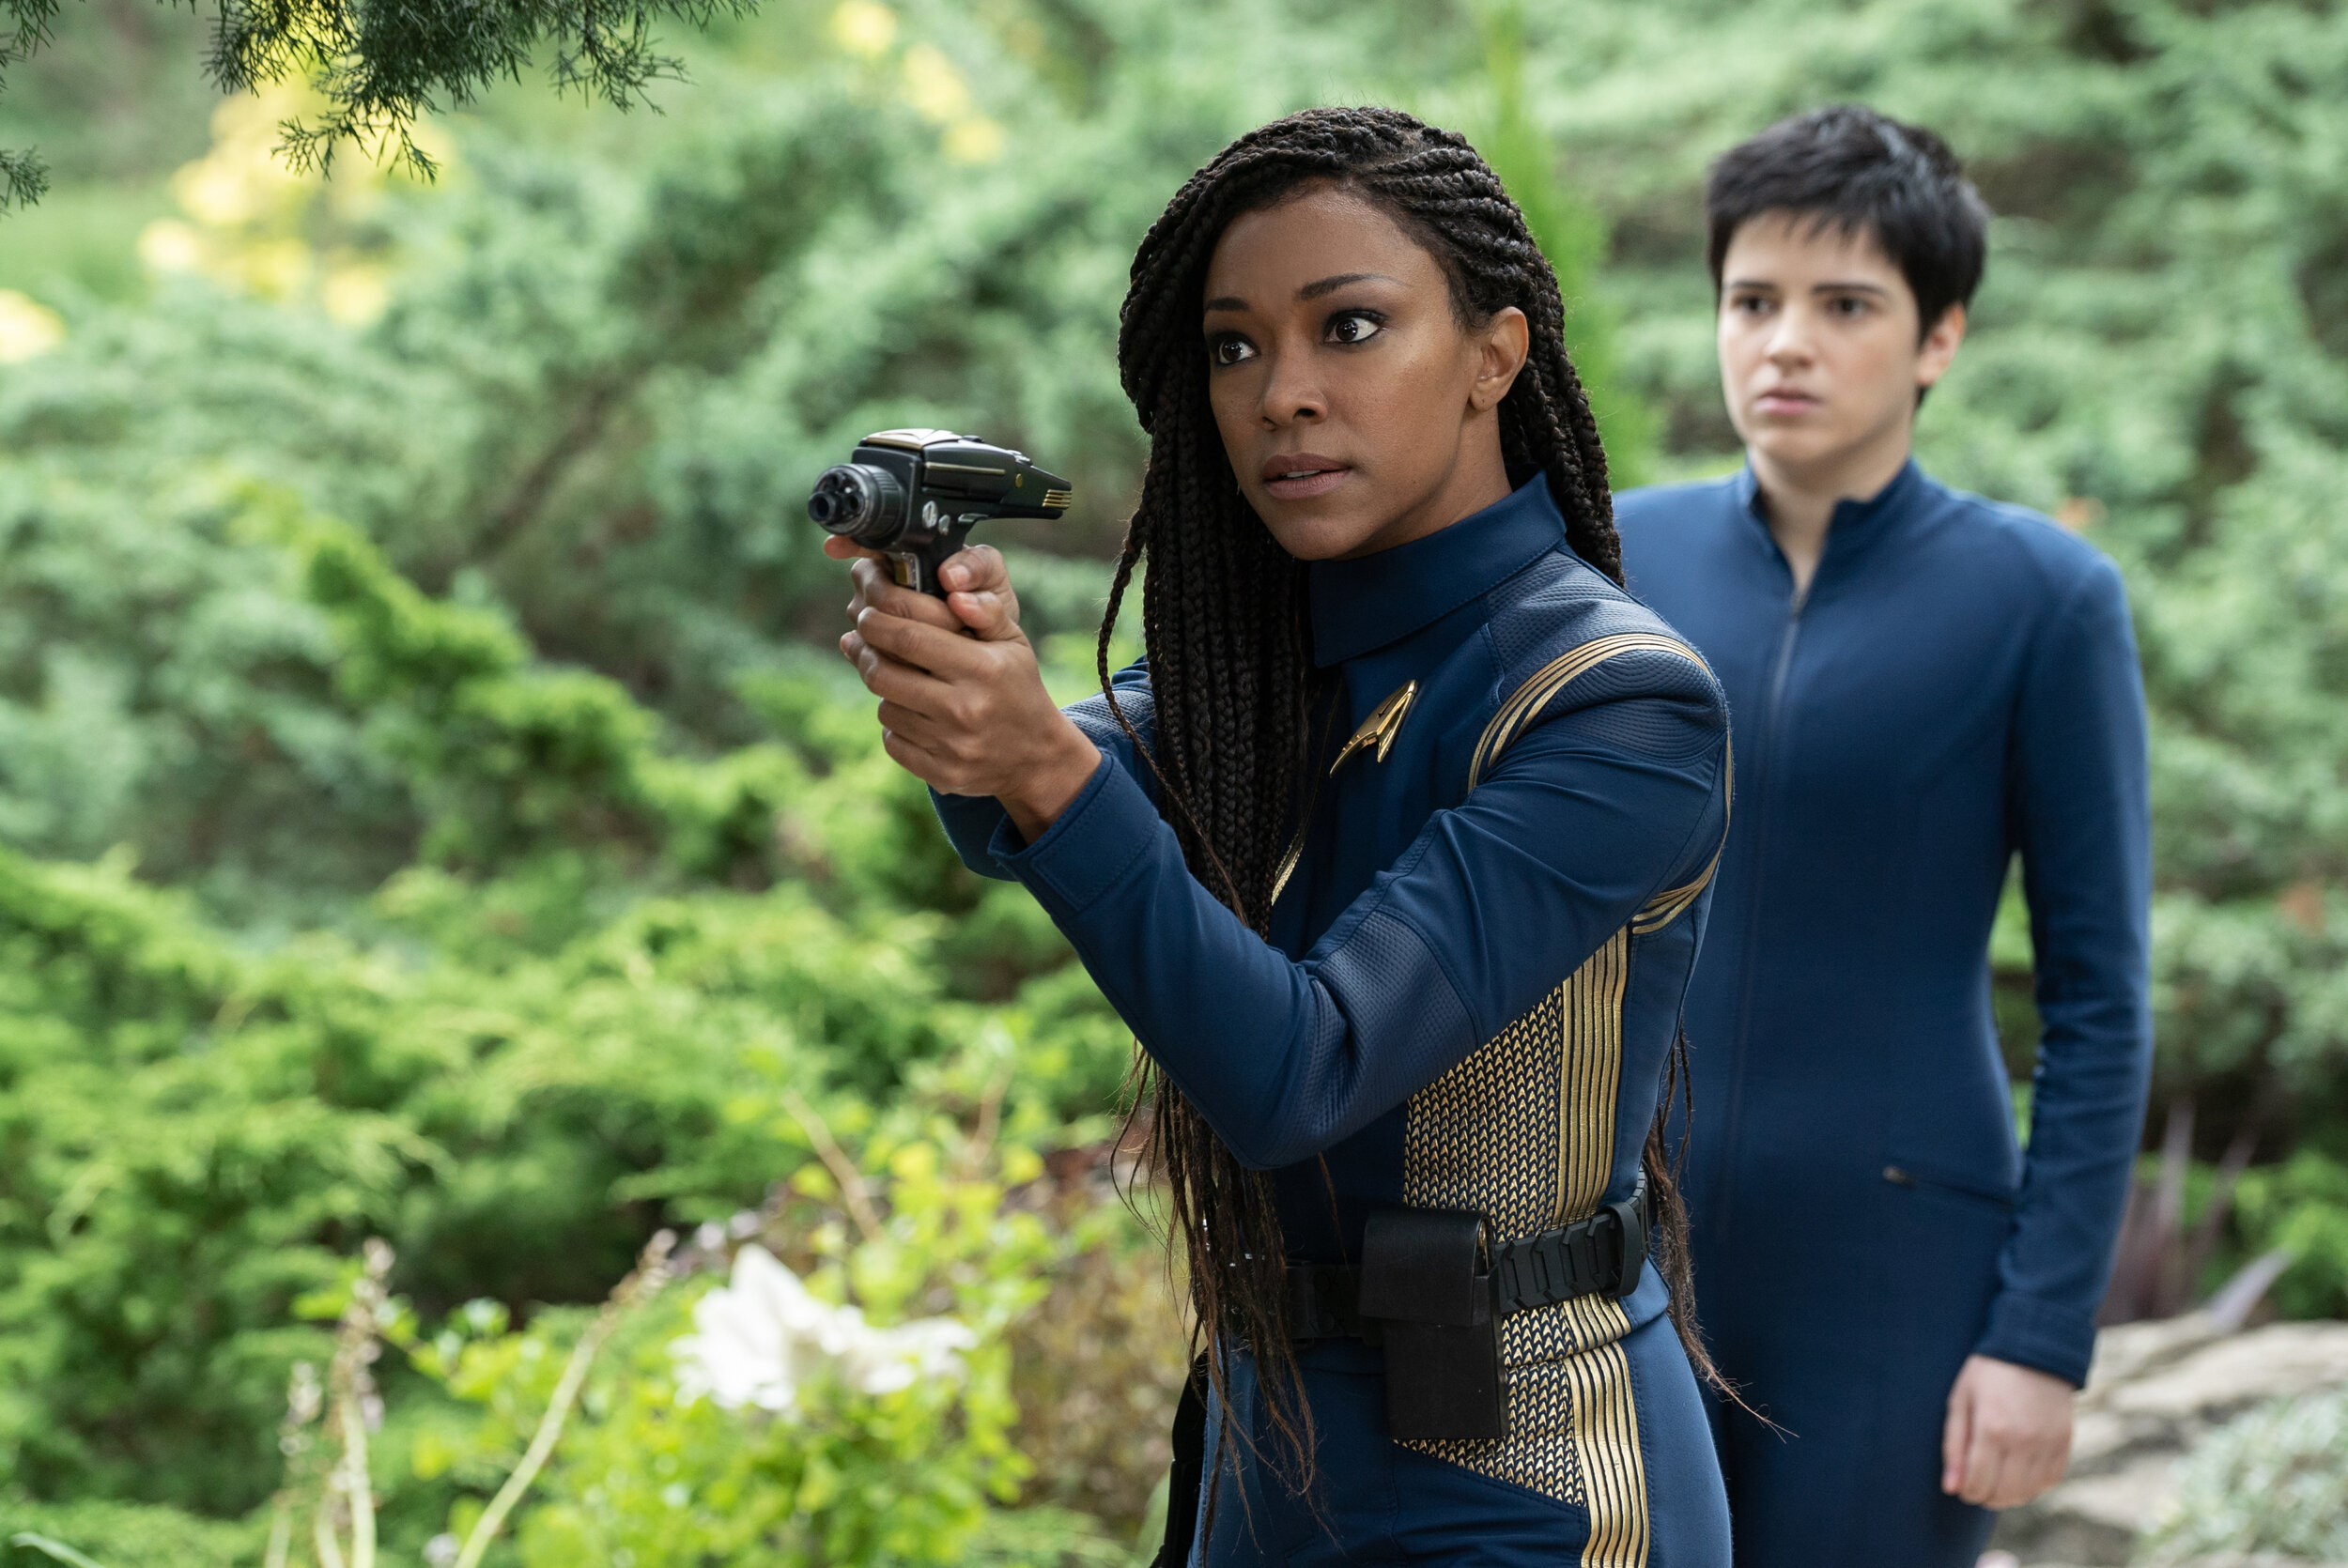   "Forget Me Not" -- Ep#304 -- Pictured: Sonequa Martin-Green as Burnham and Blu del Barrio as Adira of the CBS All Access series STAR TREK: DISCOVERY. Photo Cr: Michael Gibson/CBS ©2020 CBS Interactive, Inc. All Rights Reserved.  